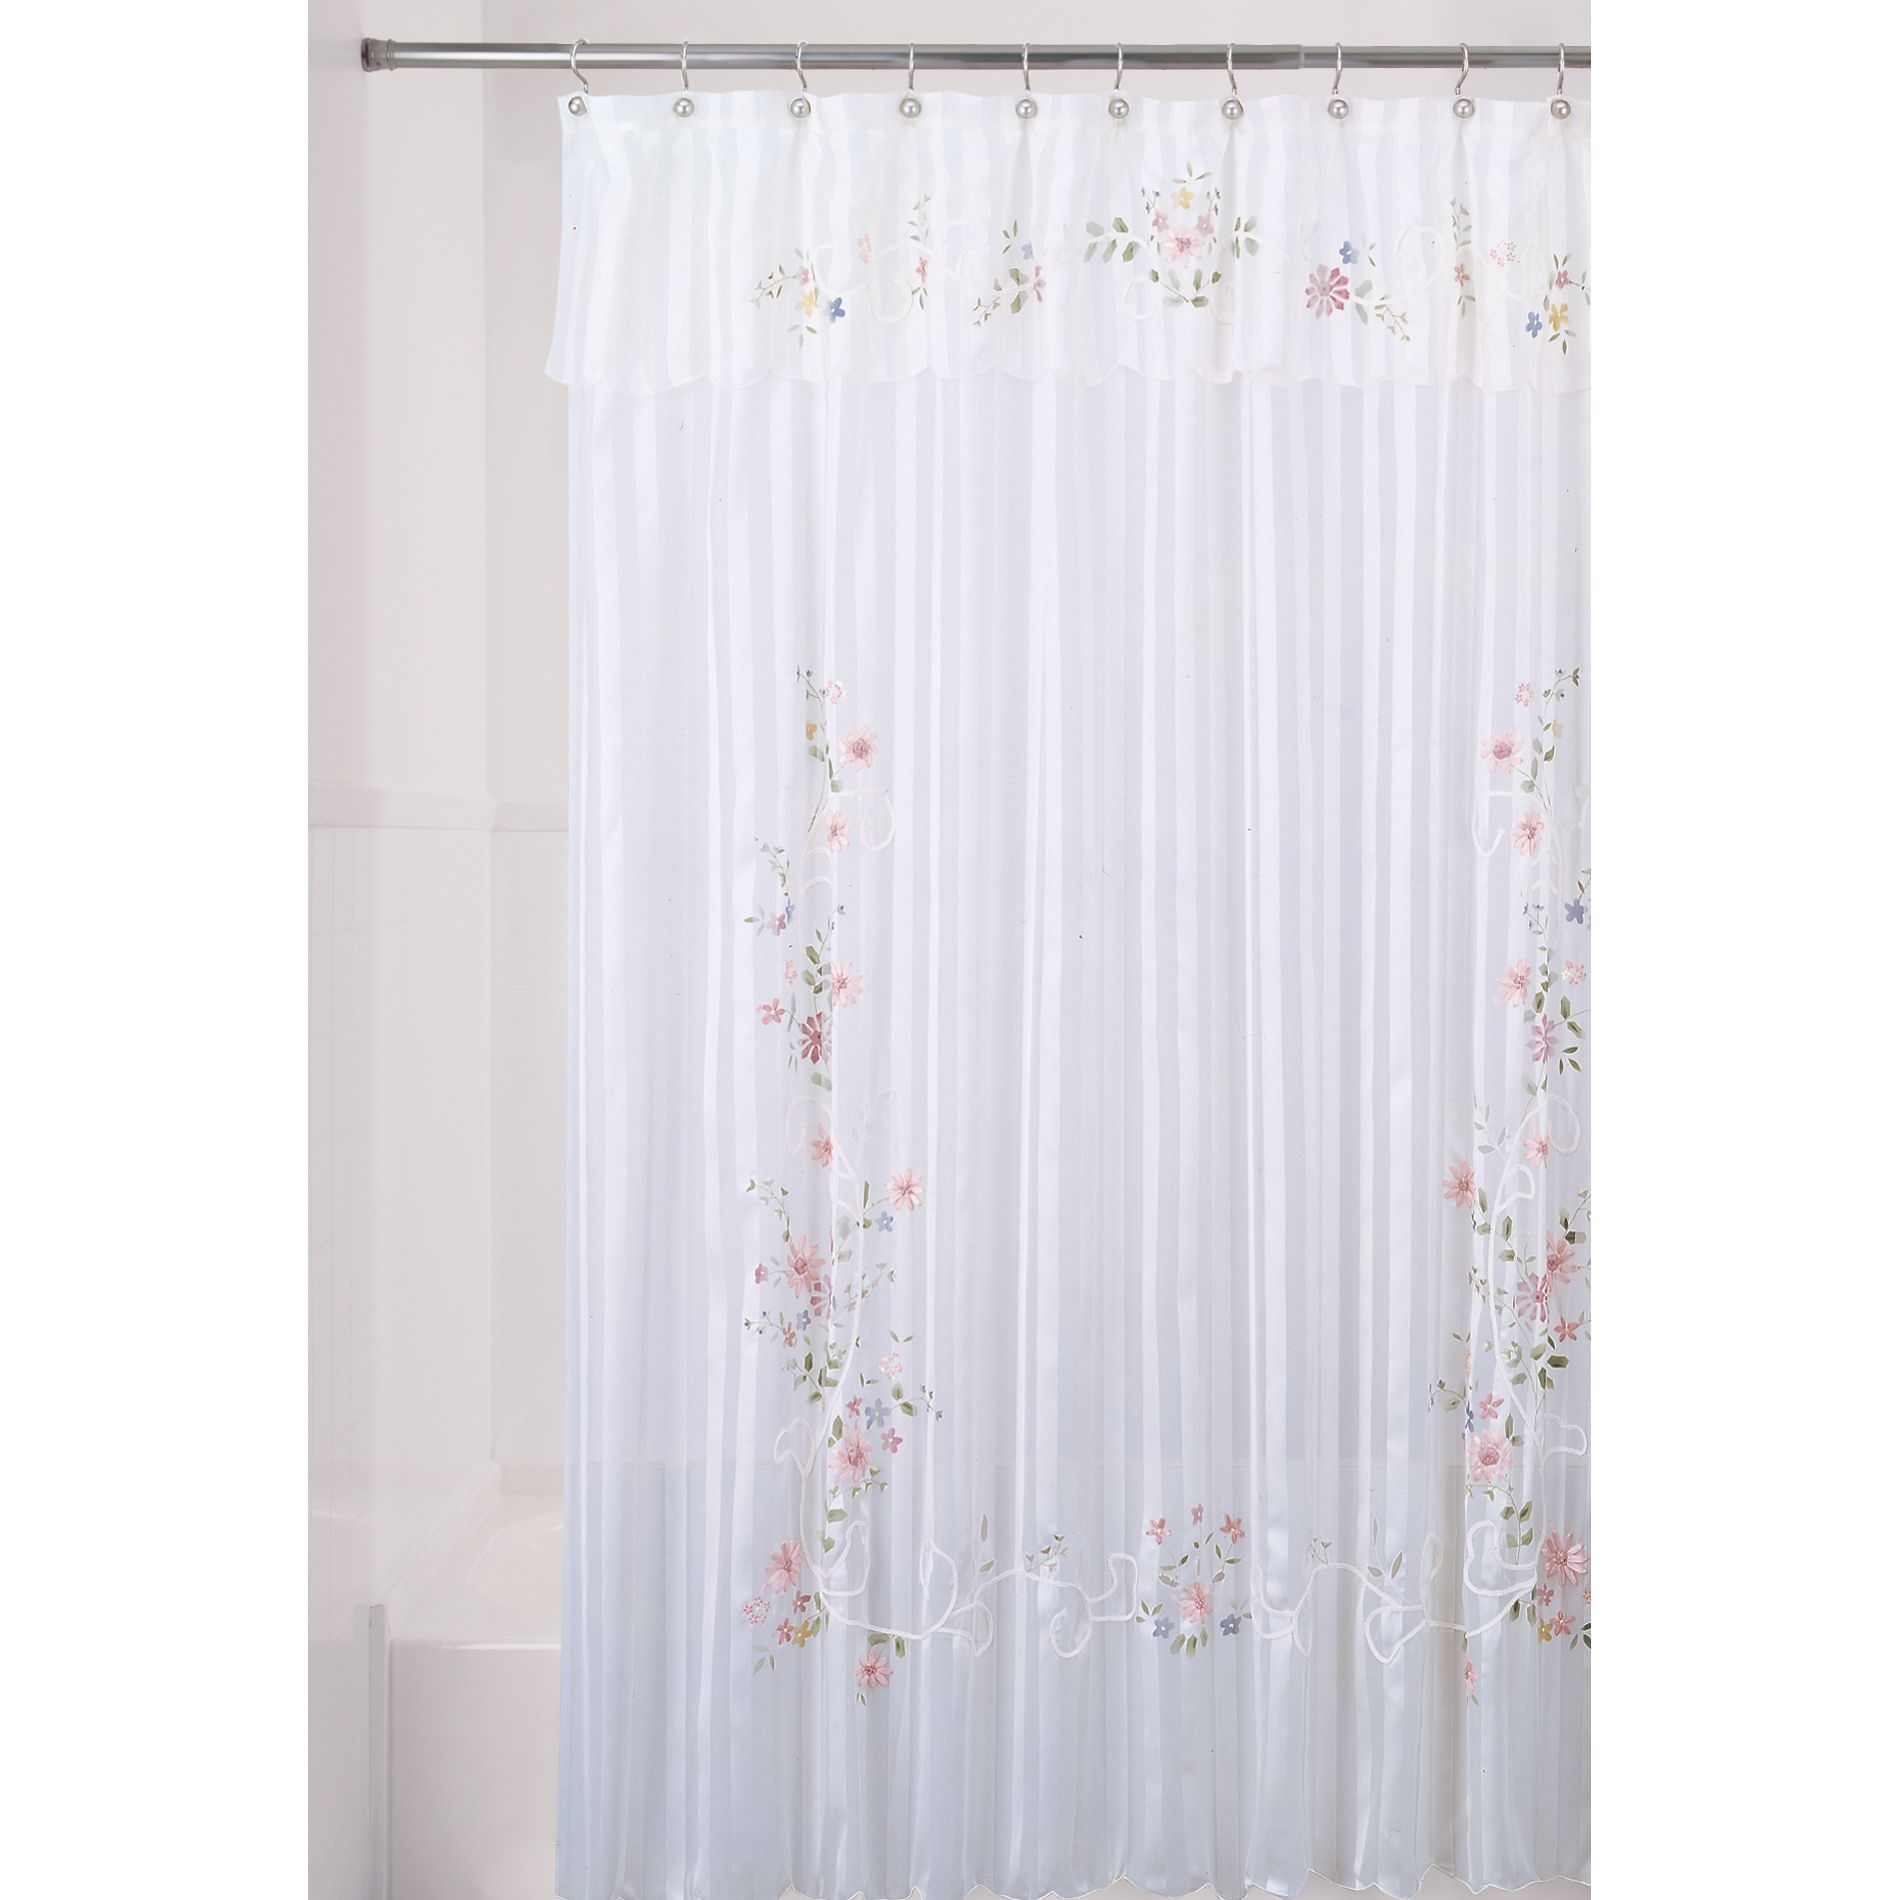 Essential Home Shower Curtain Ribbon Flower Fabric   Home   Bed & Bath